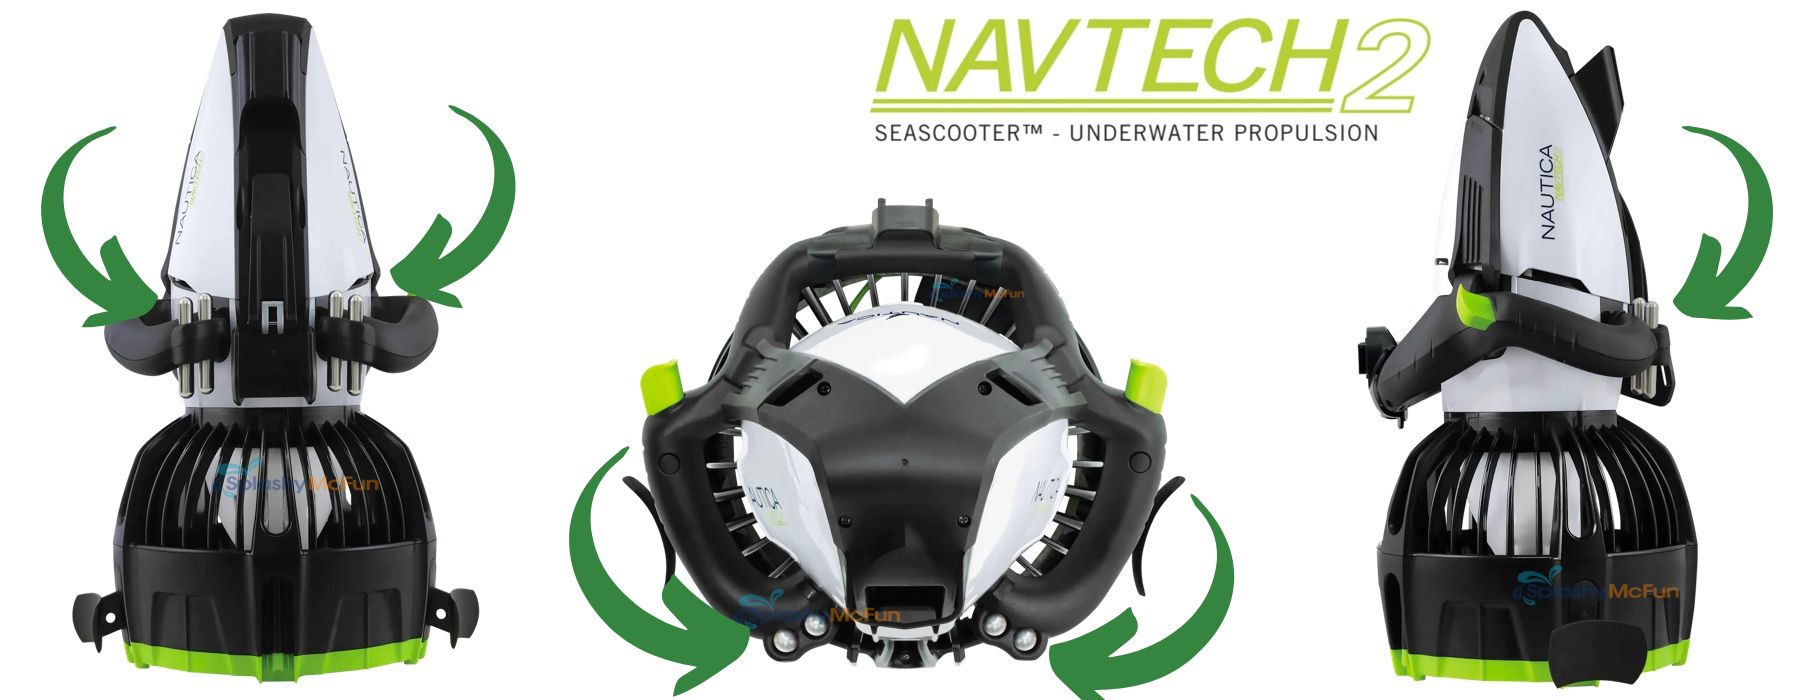 Closeup view of 3 angles of the Nautica Navtech 2 sea scooter. Shows that 4 weights can be slid into slots to achieve neutral buoyancy.